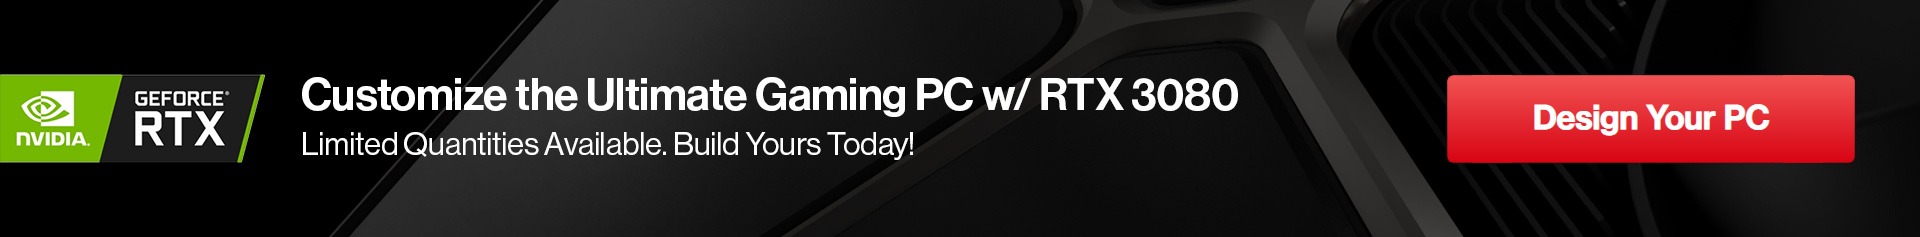 Customize RTX 30 Series Gaming PC